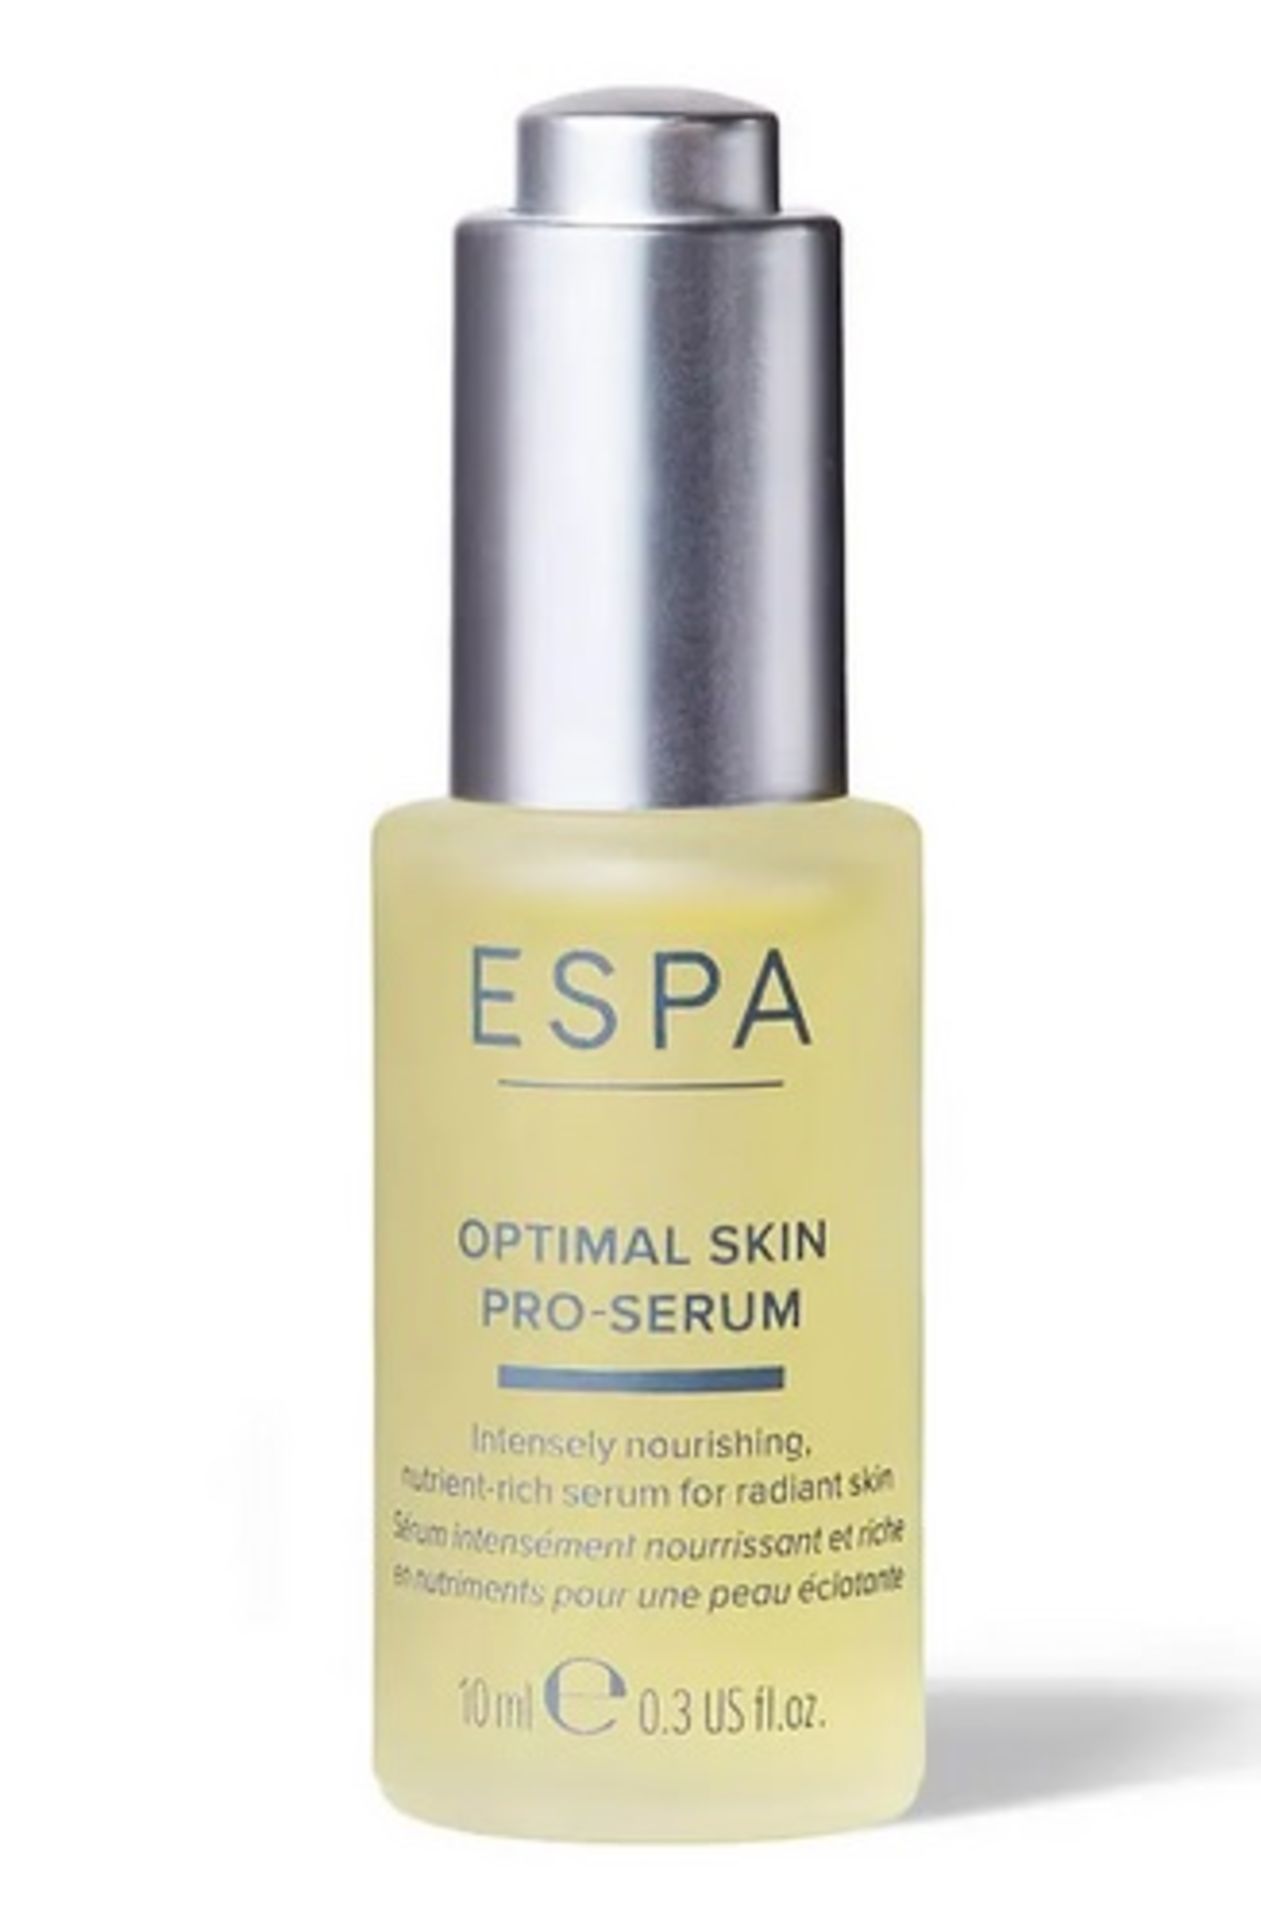 TRADE LOT TO CONTAIN 150x NEW ESPA Optimal Skin Pro-Serum 10ml. RRP £10 each. (R12-16) The key to